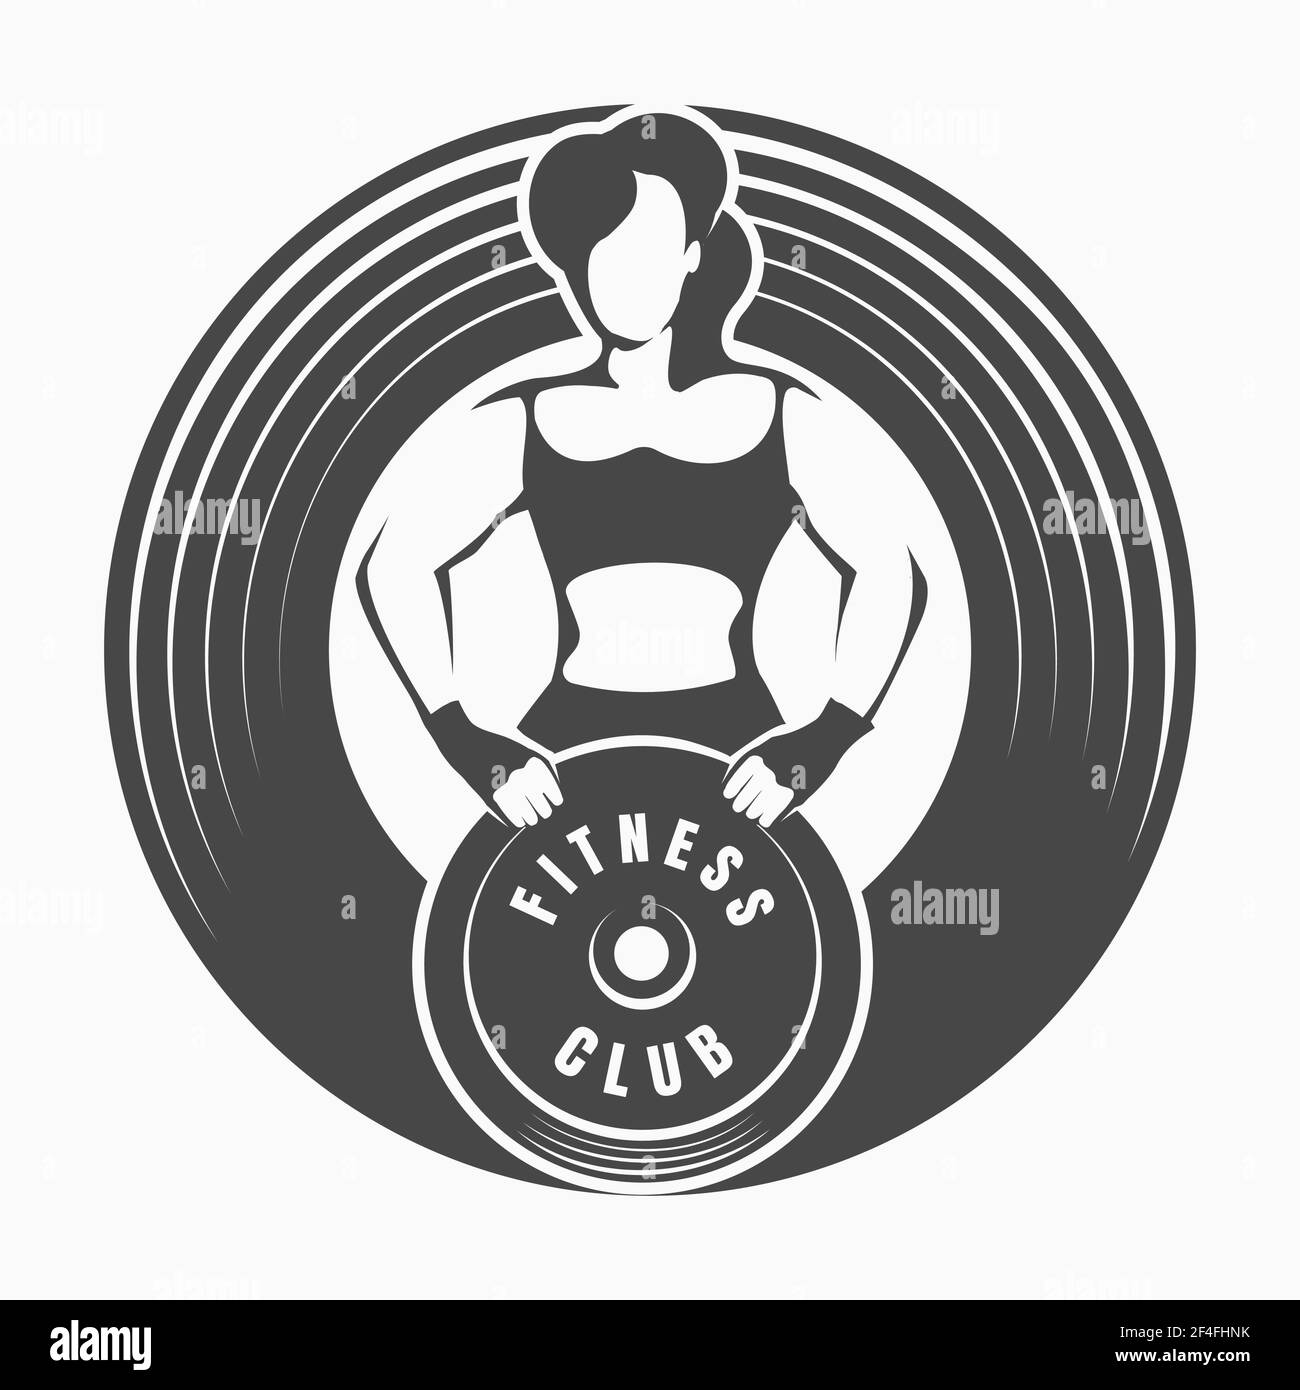 Fitness Logo or Emblem with Woman Holding Barbell Weight isolated on white. Vector illustration. Stock Vector